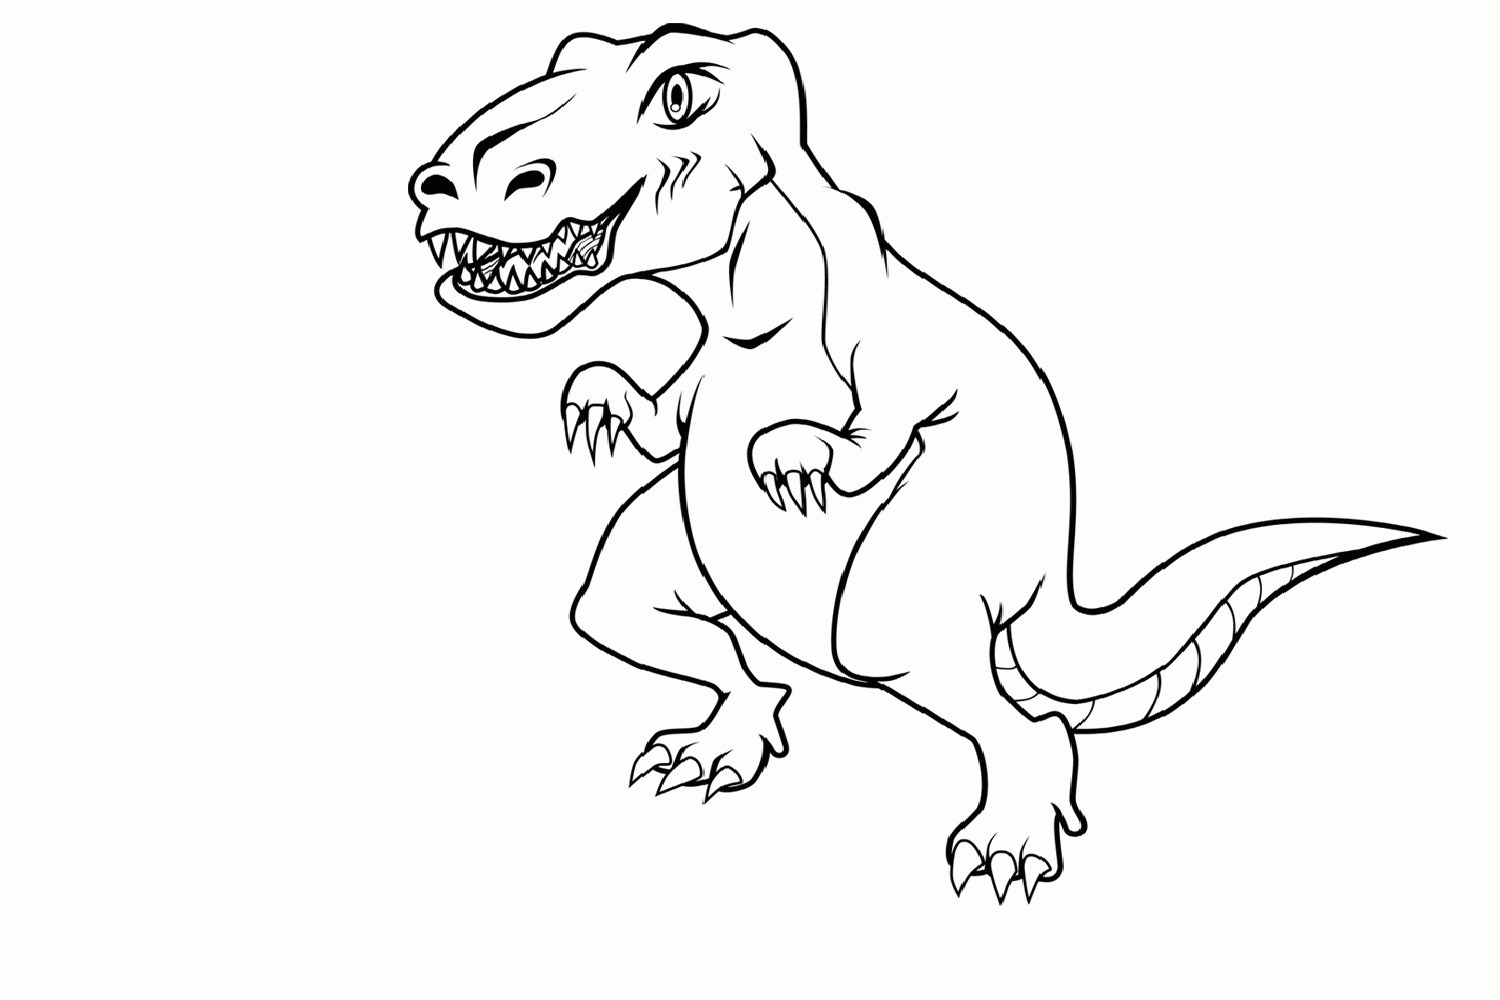 coloring-now-blog-archive-dinosaur-coloring-pages-for-kids